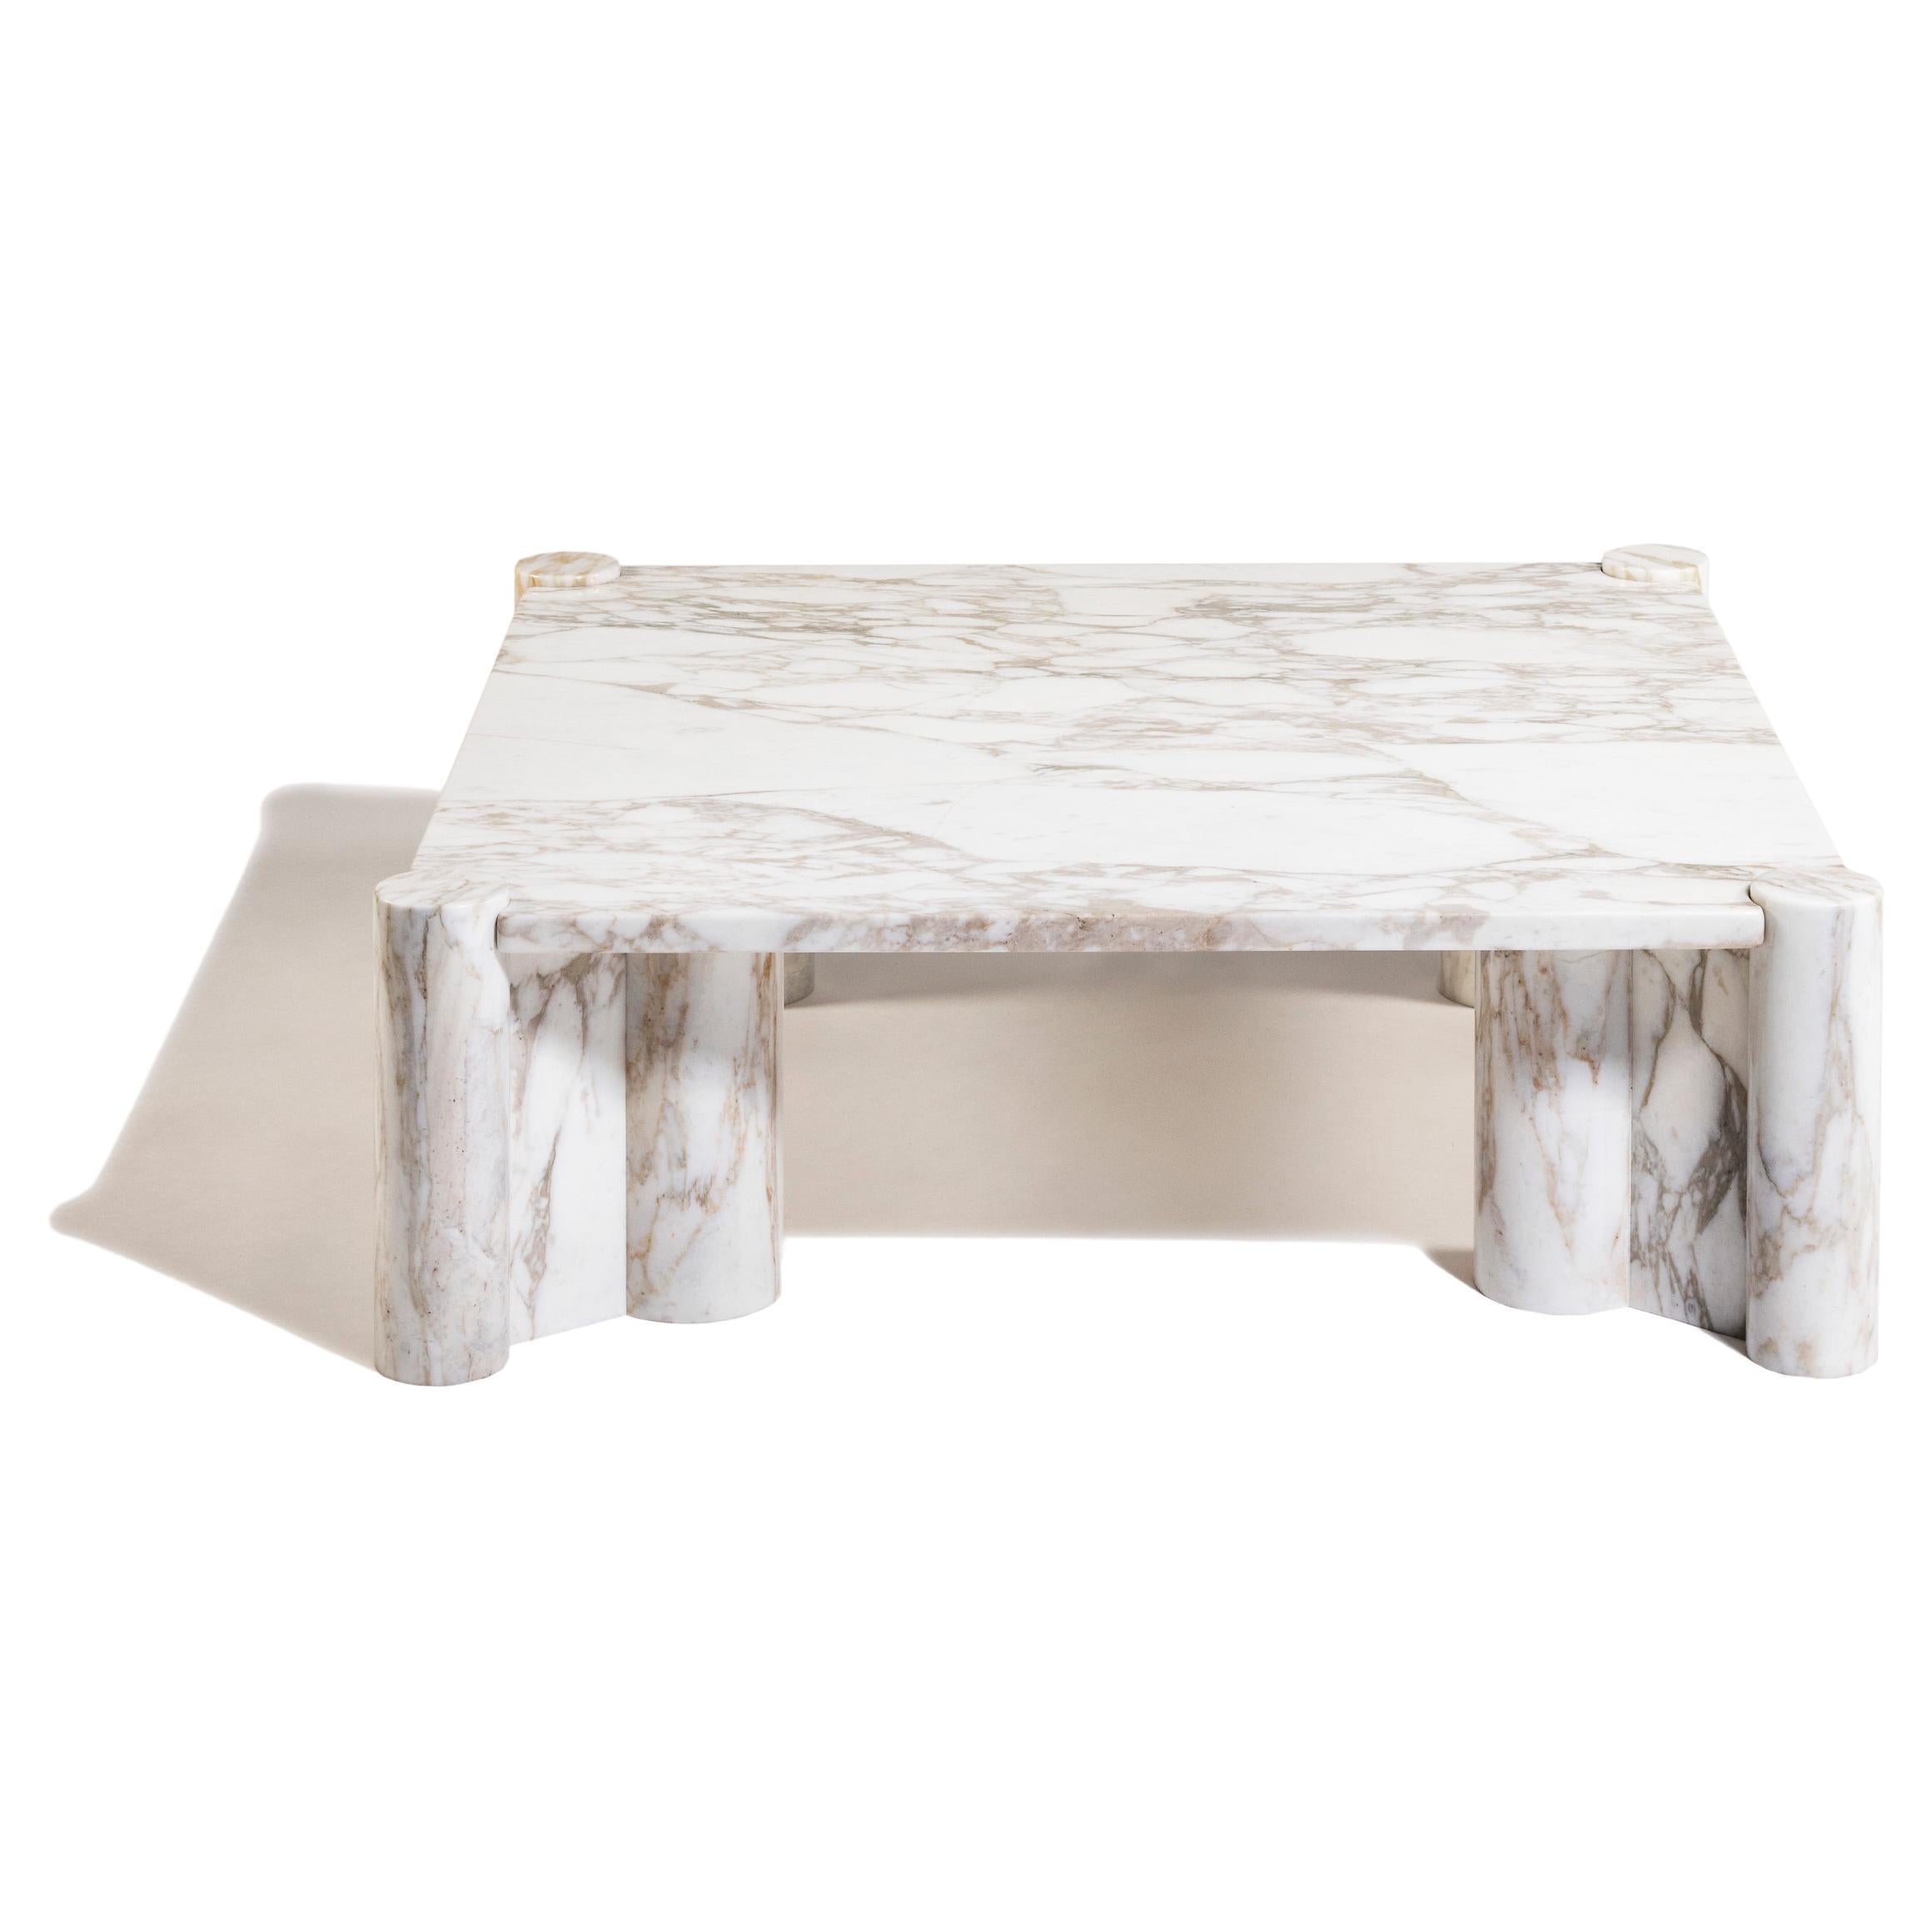 Iconic Jumbo table in White Carrara marble by Gae Aulenti for Knoll. Italy, 1960s.